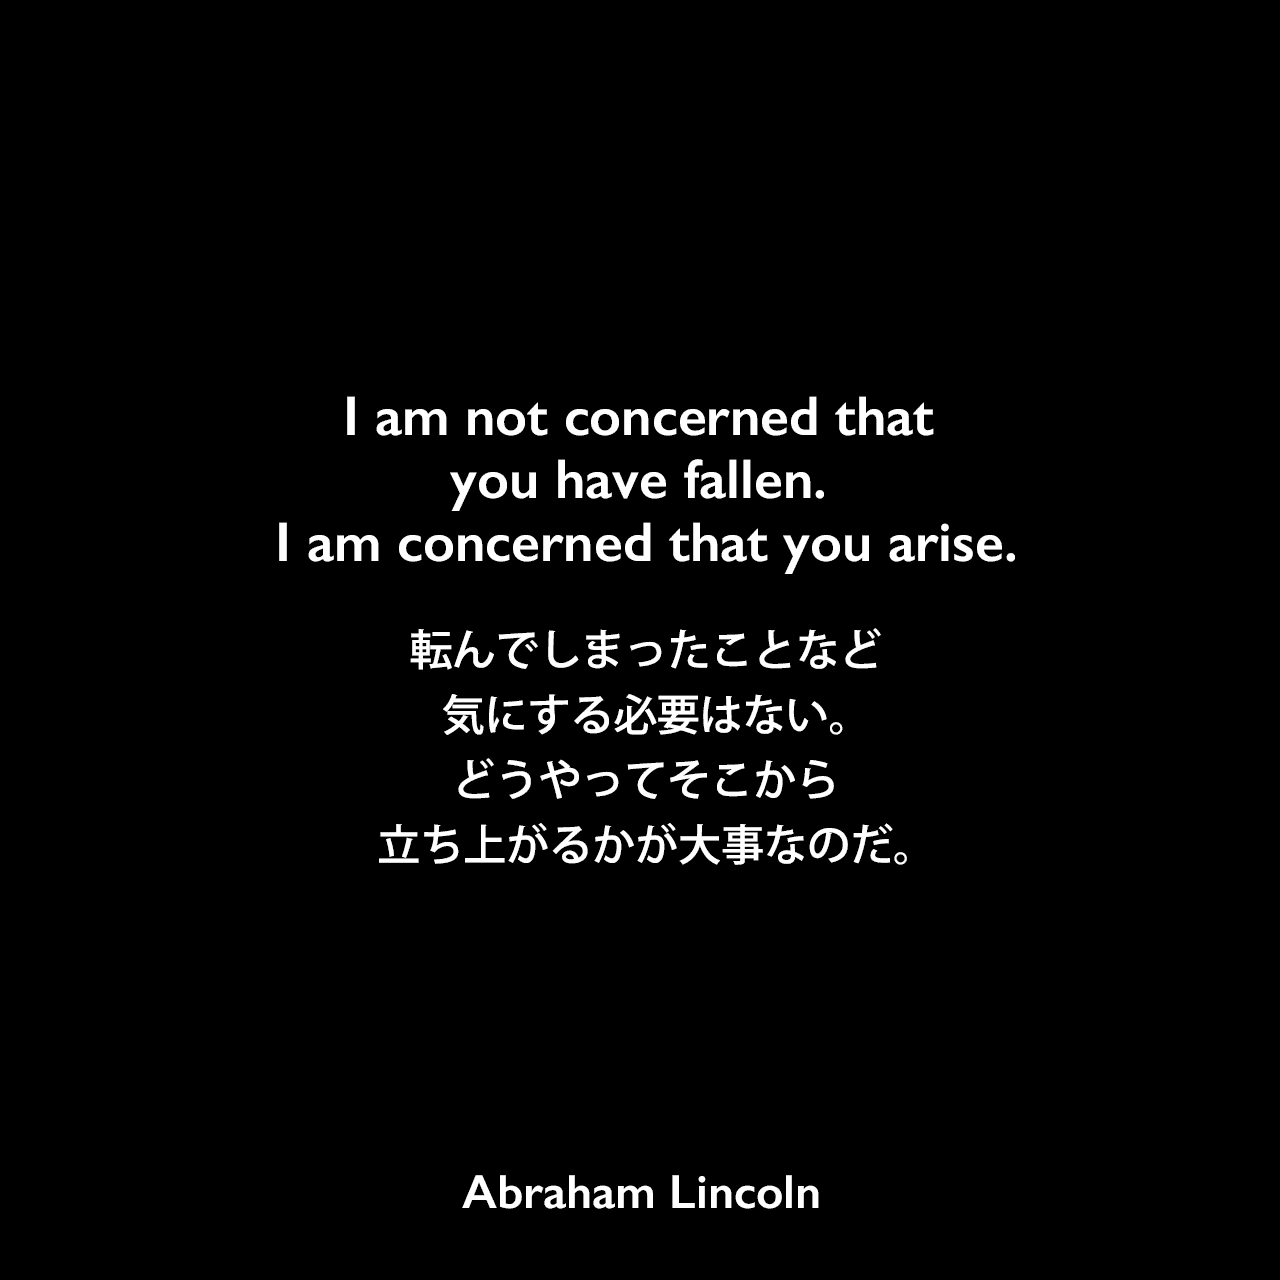 I am not concerned that you have fallen. I am concerned that you arise.転んでしまったことなど気にする必要はない。どうやってそこから立ち上がるかが大事なのだ。Abraham Lincoln